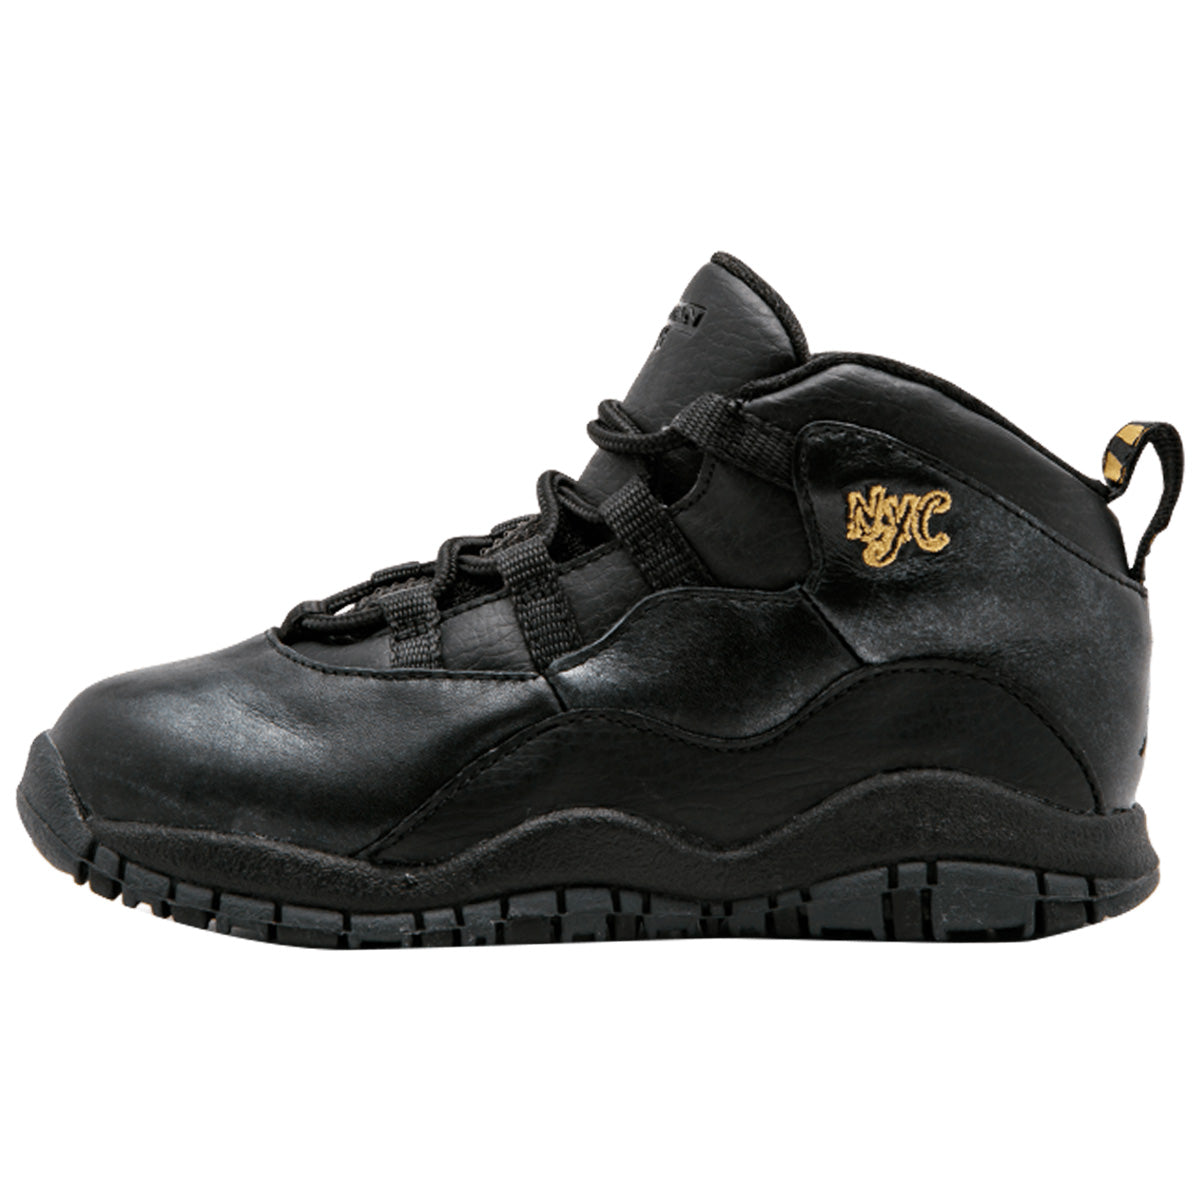 Jordan Retro 10 "NYC" Basketball Shoes Toddlers Sneaker Style : 310808-012